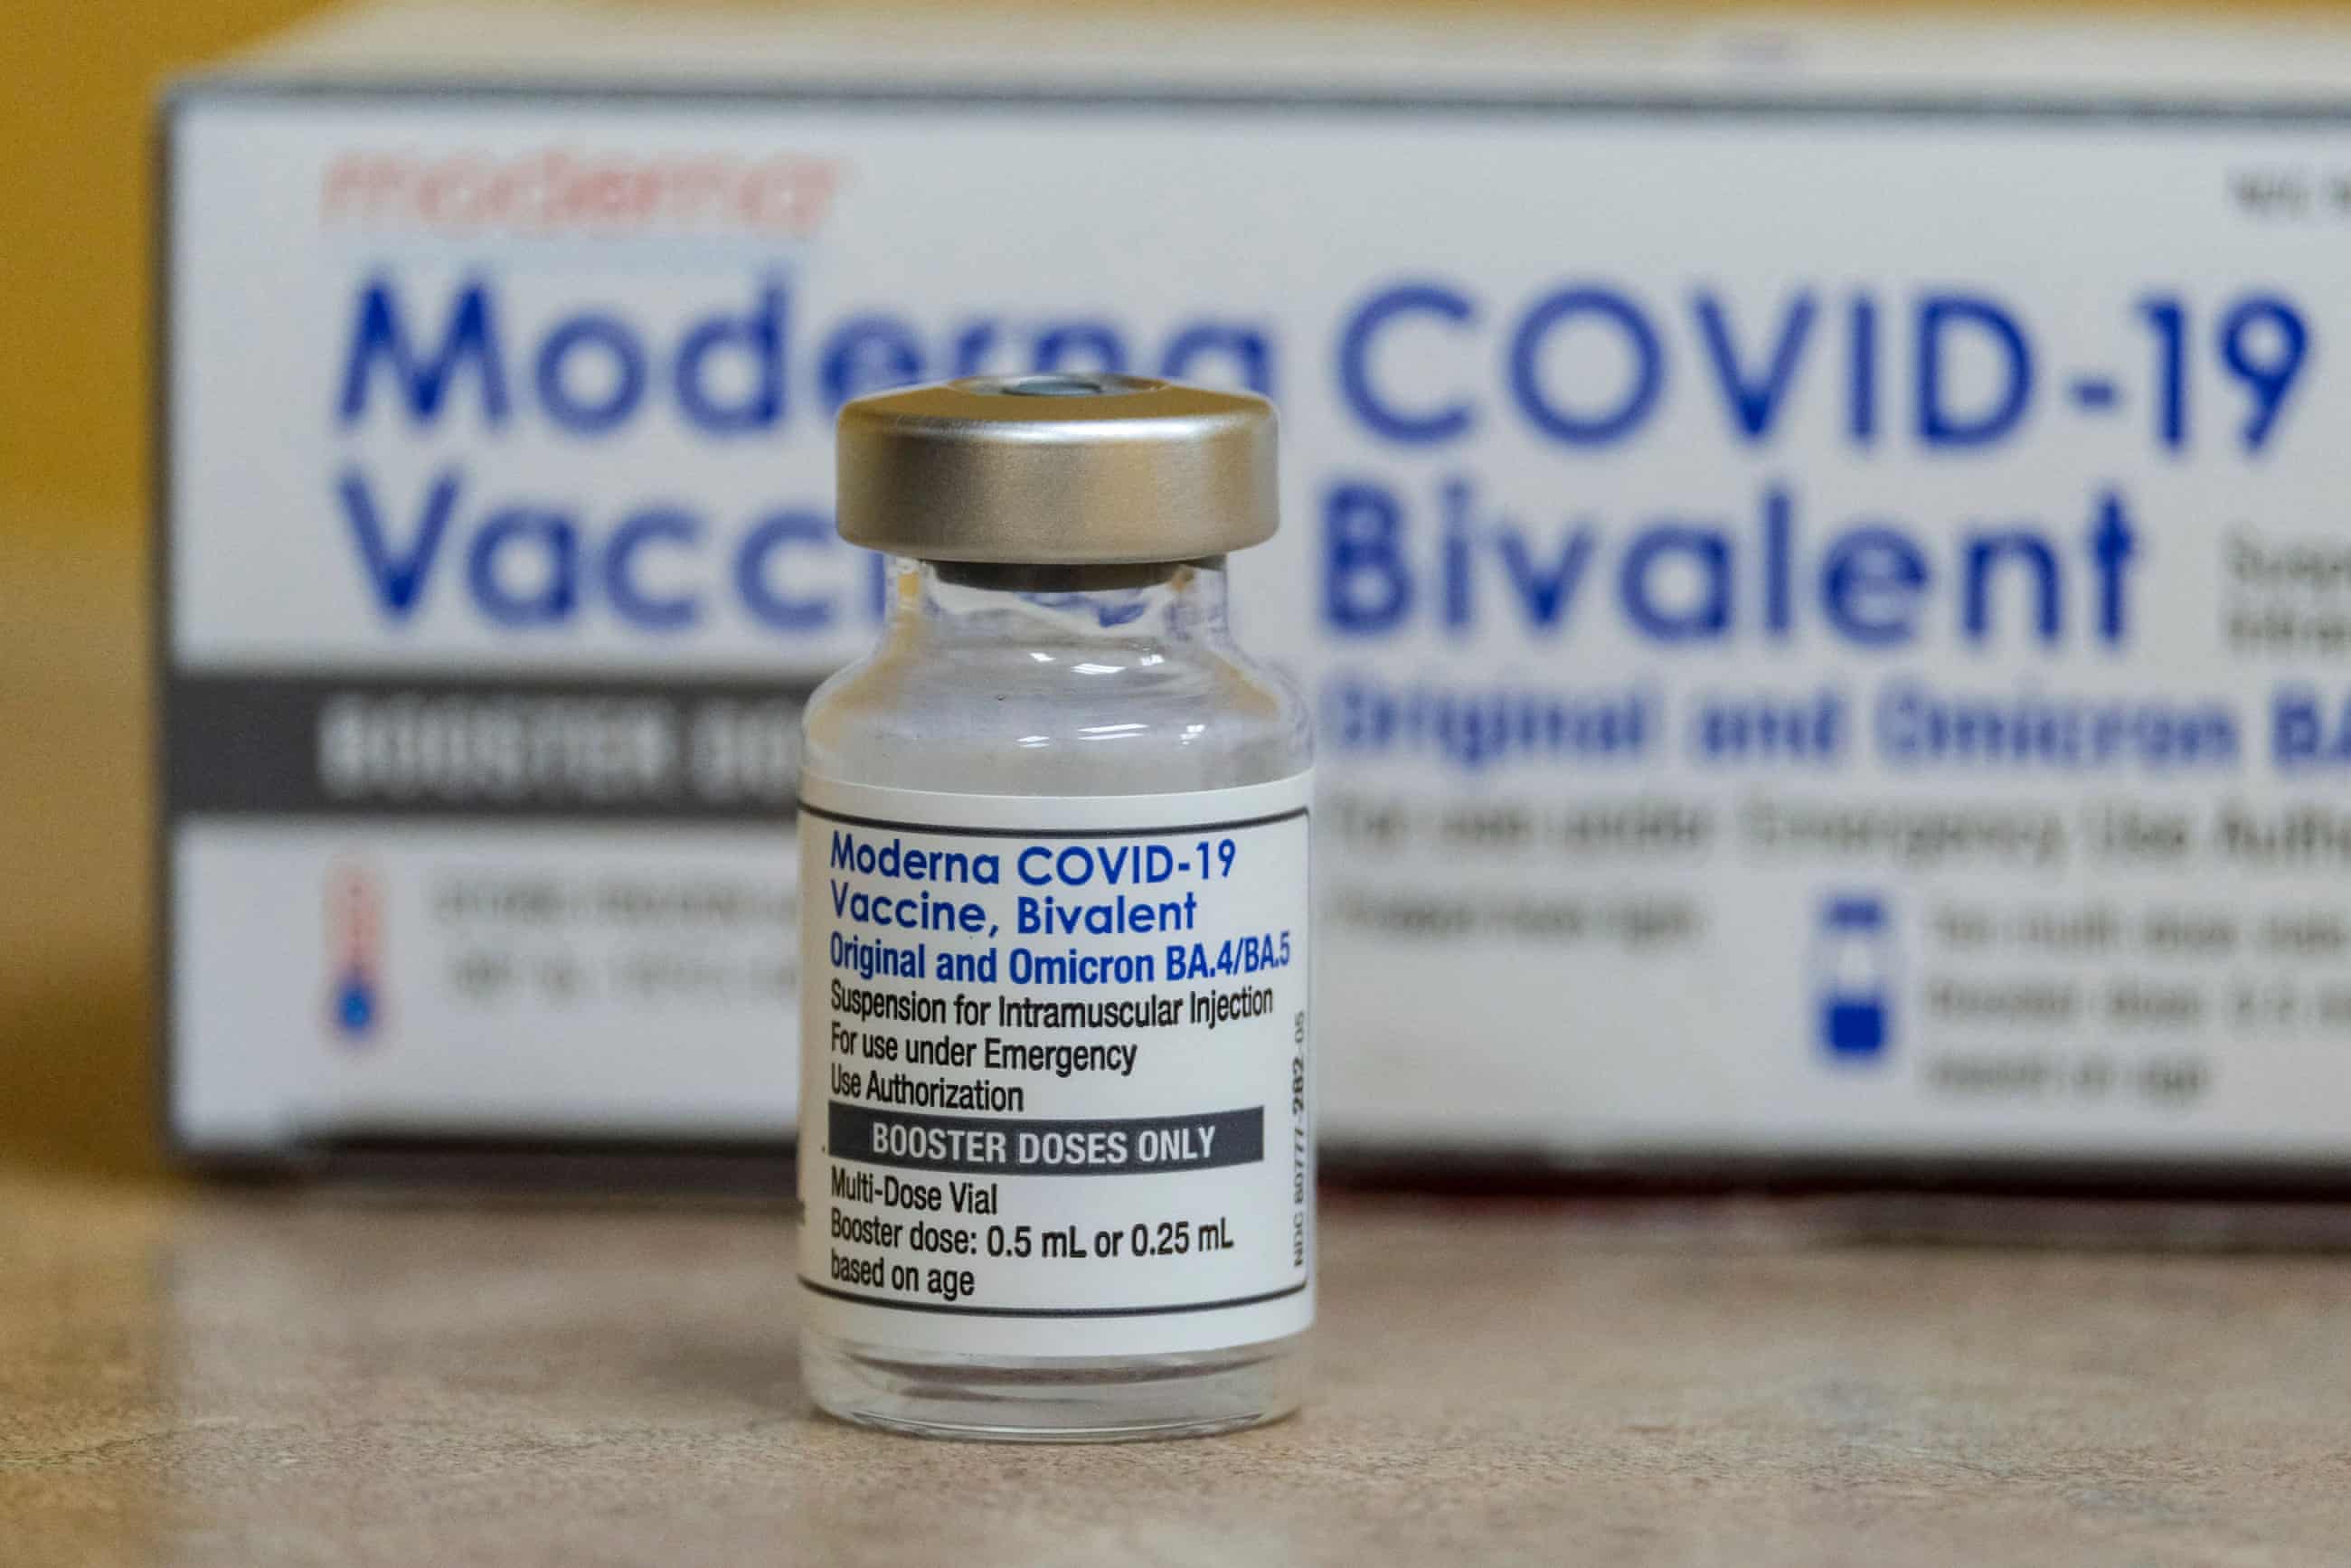 Nobel-nominated vaccine expert warns of Covid complacency: ‘We’re still losing too many lives’